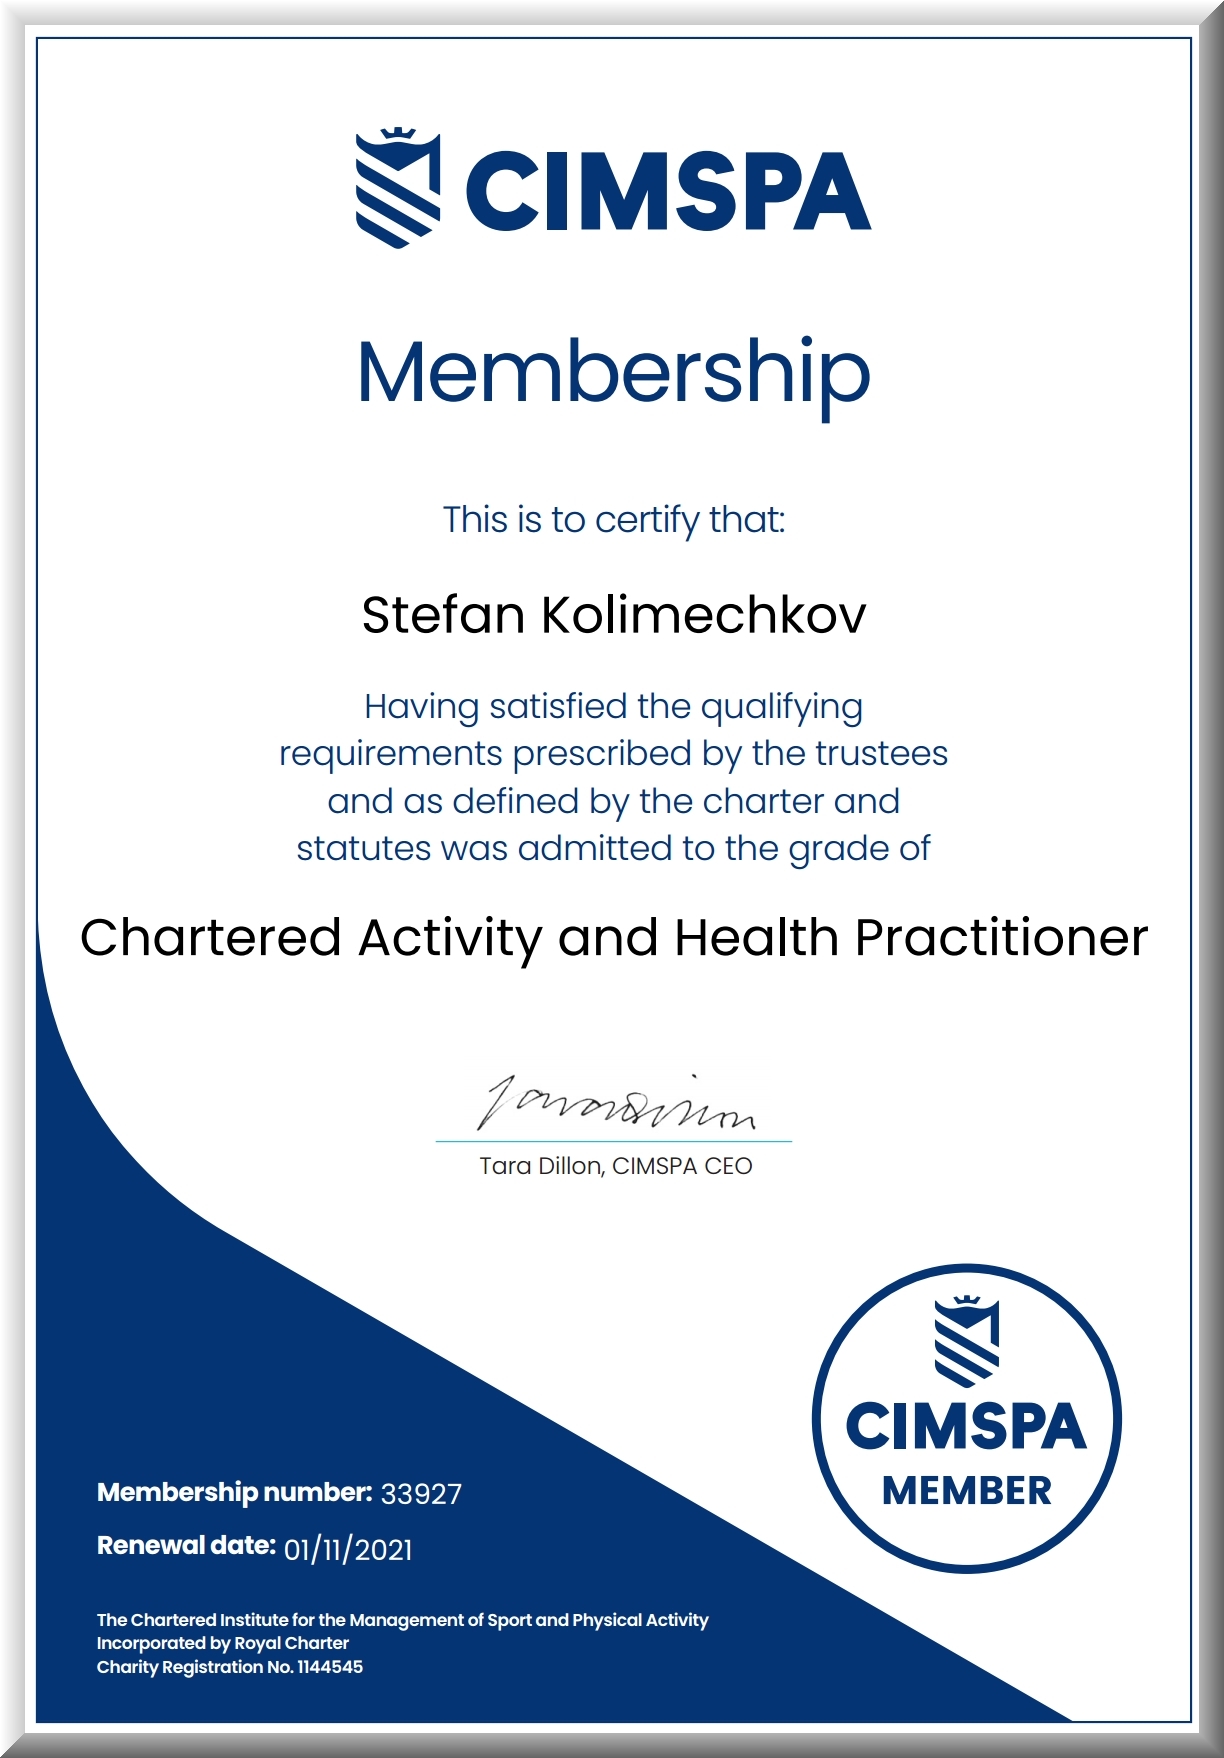 Chartered Activity and Health Practitioner